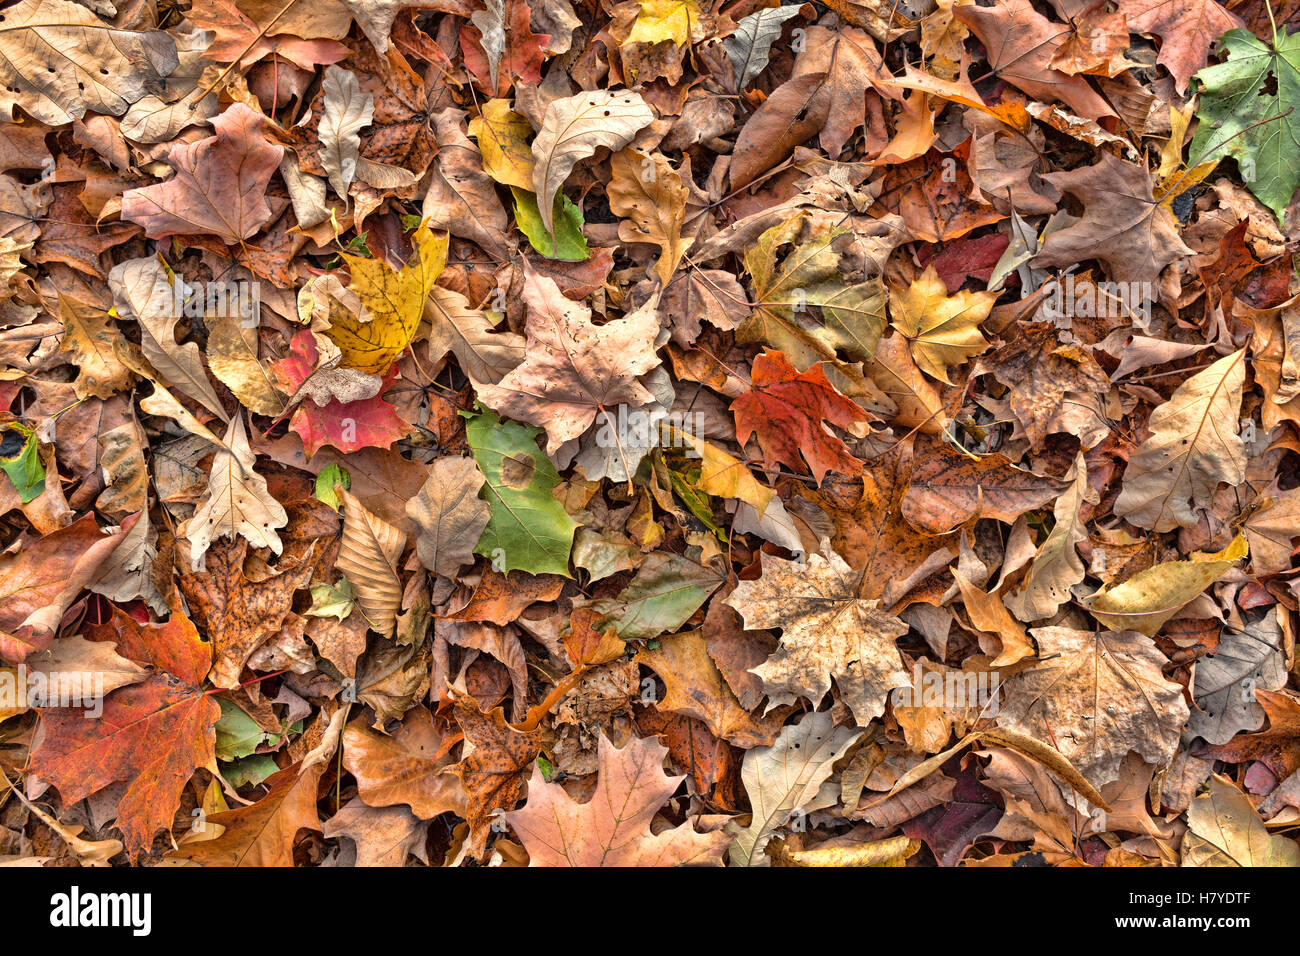 A collection of colorful fall leaves on the ground in late autumn. Stock Photo